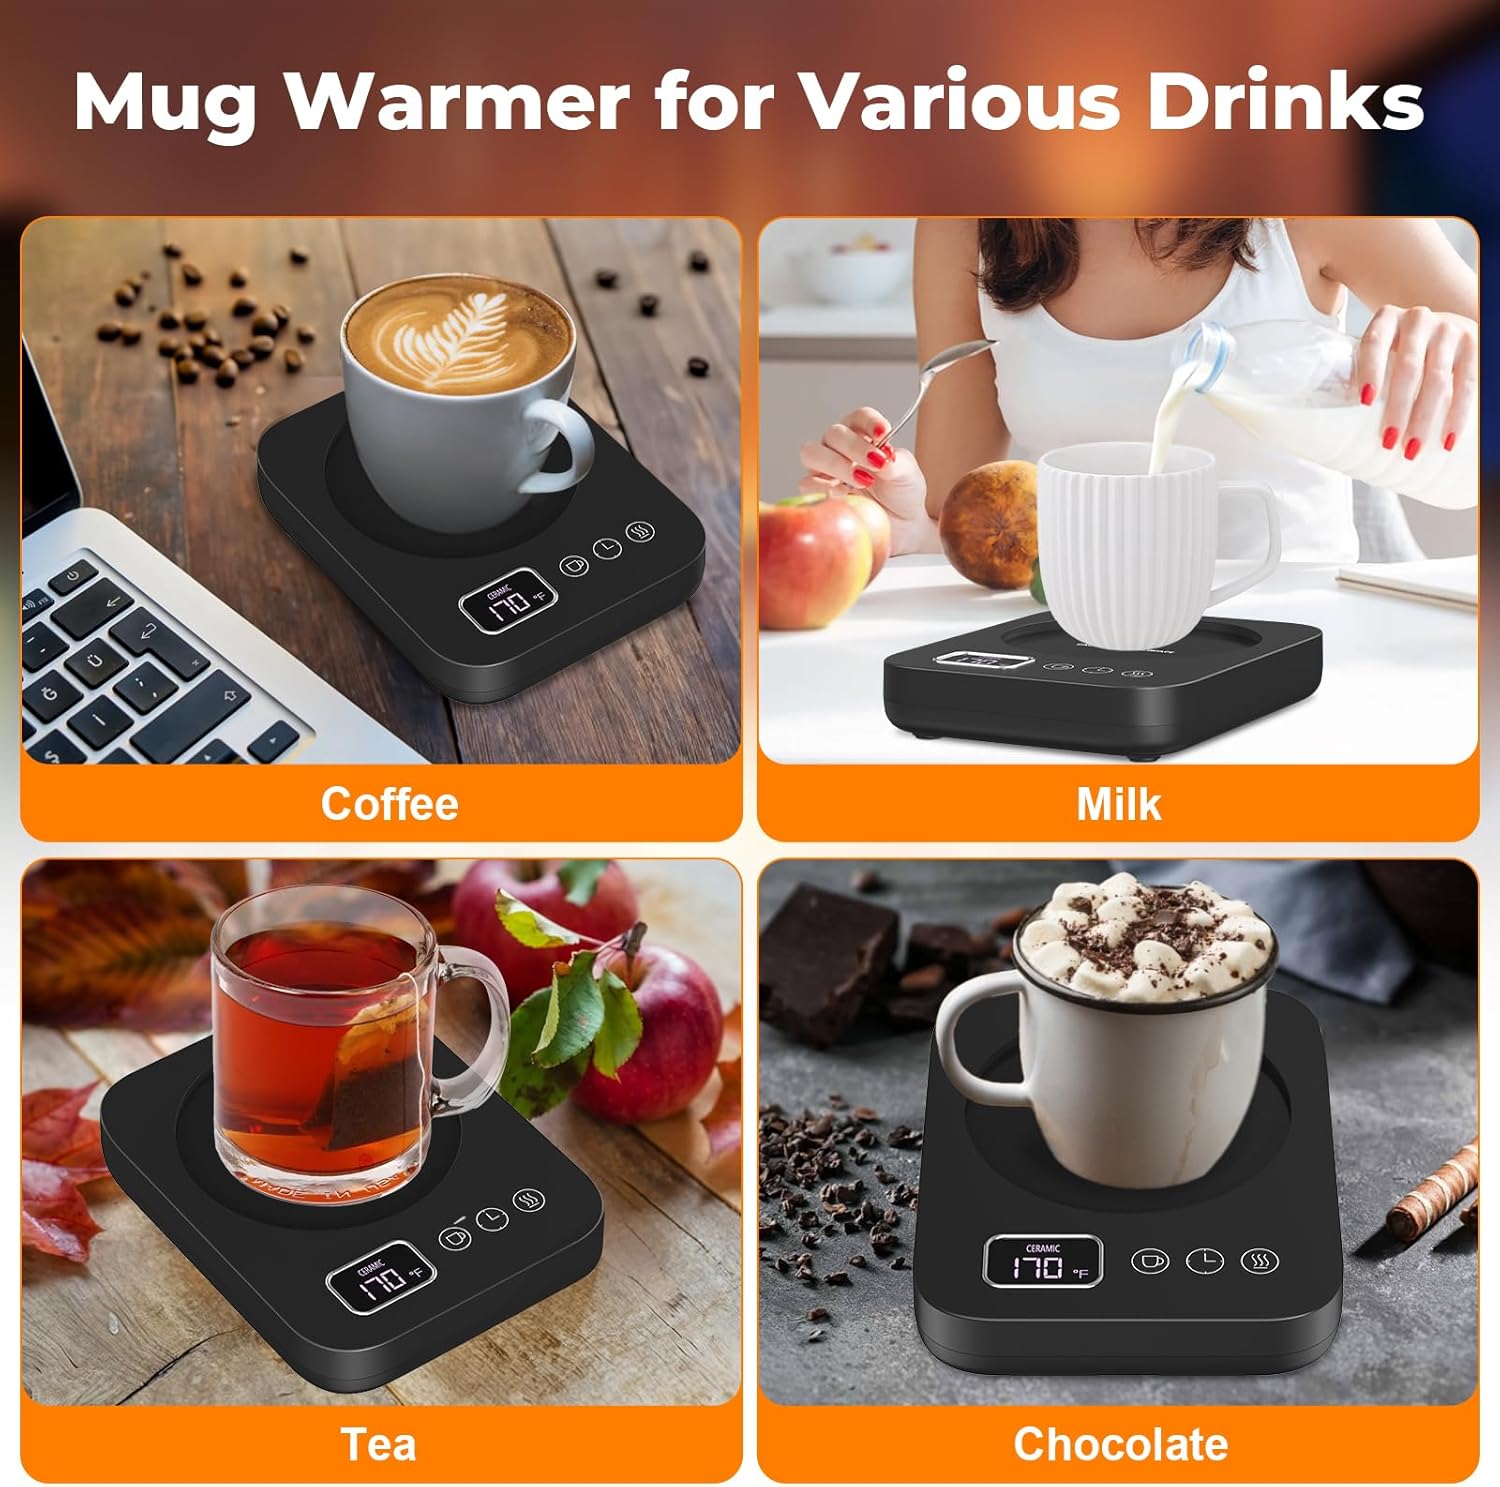 Coffee Mug Warmer - Cup Warmer for Desk Candle Warmer Automatic Shut Off, Smart Beverage Warmer with 3 Temperature Settings Touch Switch for Coffee, Water, Milk, Tea, Safely Use for Office/Home